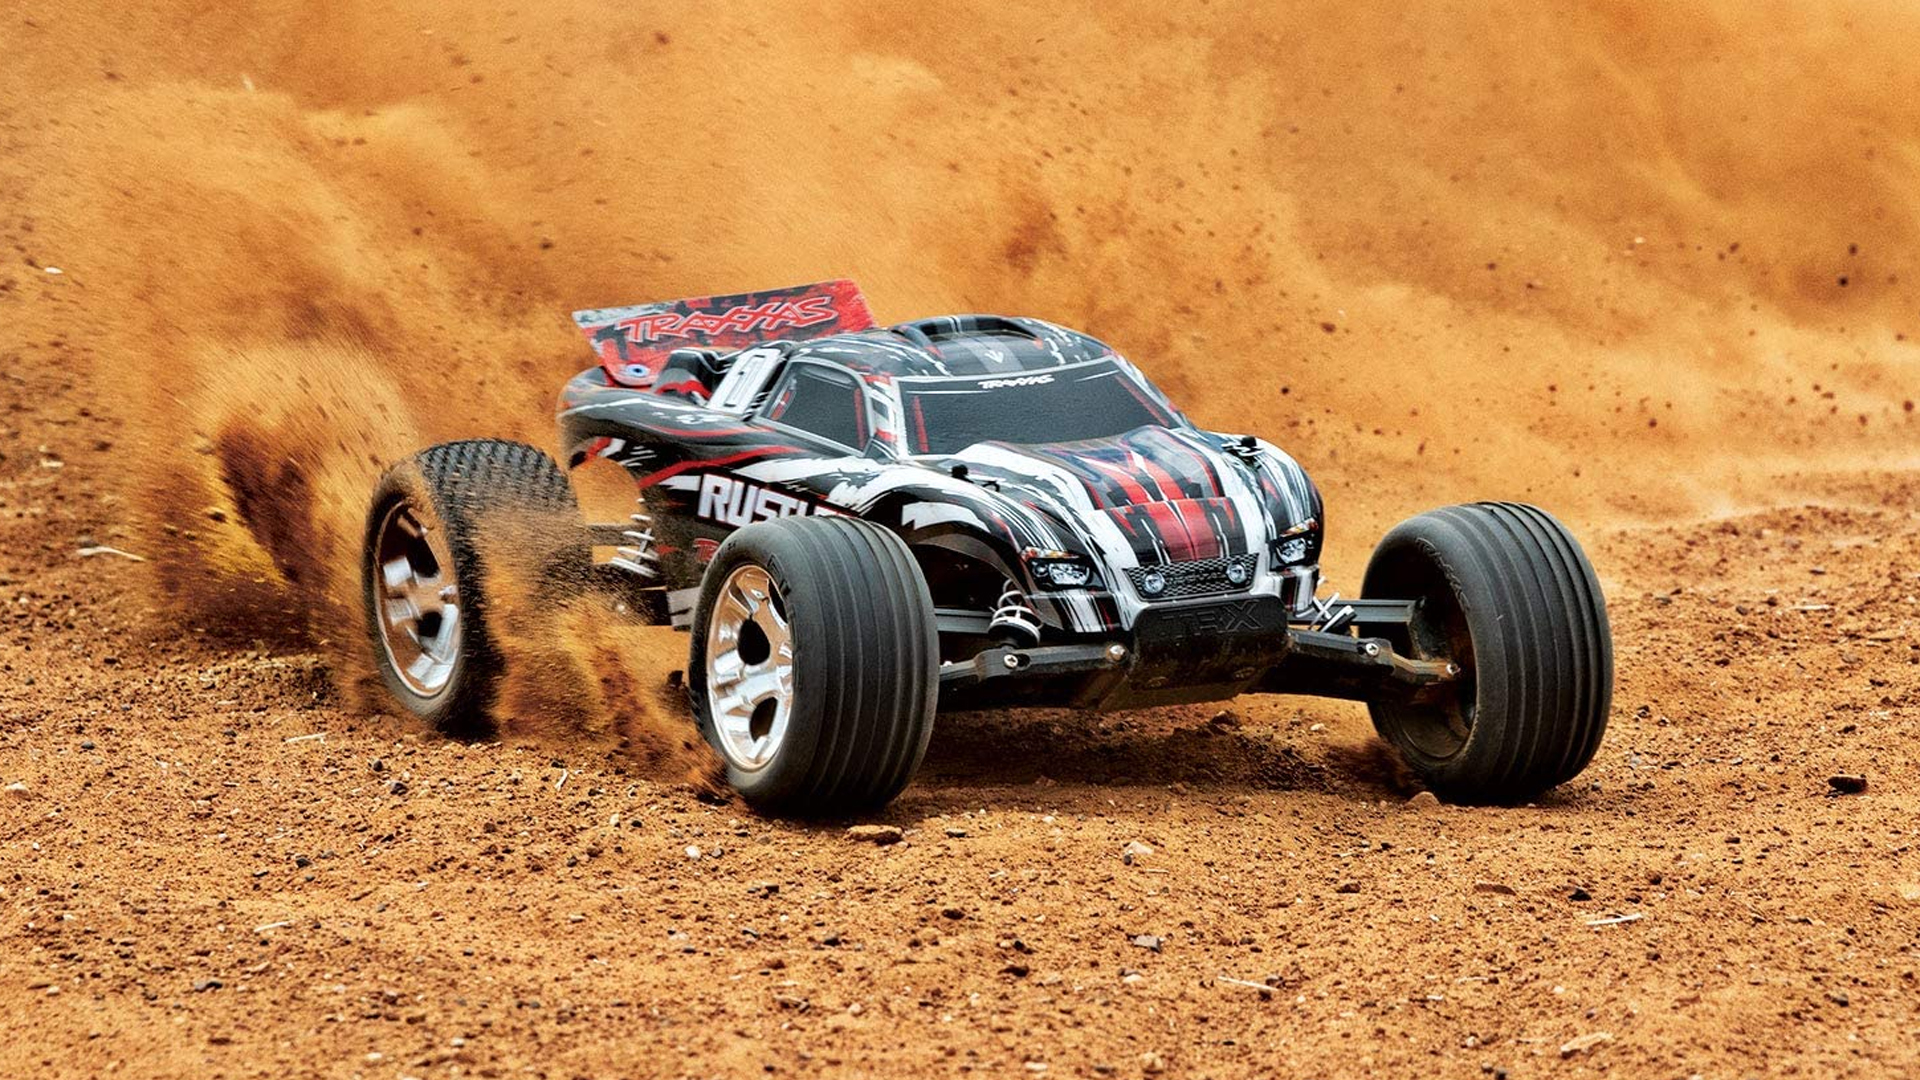 NEW RC REMOTE CONTROL SUPER HIGH SPEED RACING CAR OFF-ROAD BUGGY VEHICLE GIFT UK 